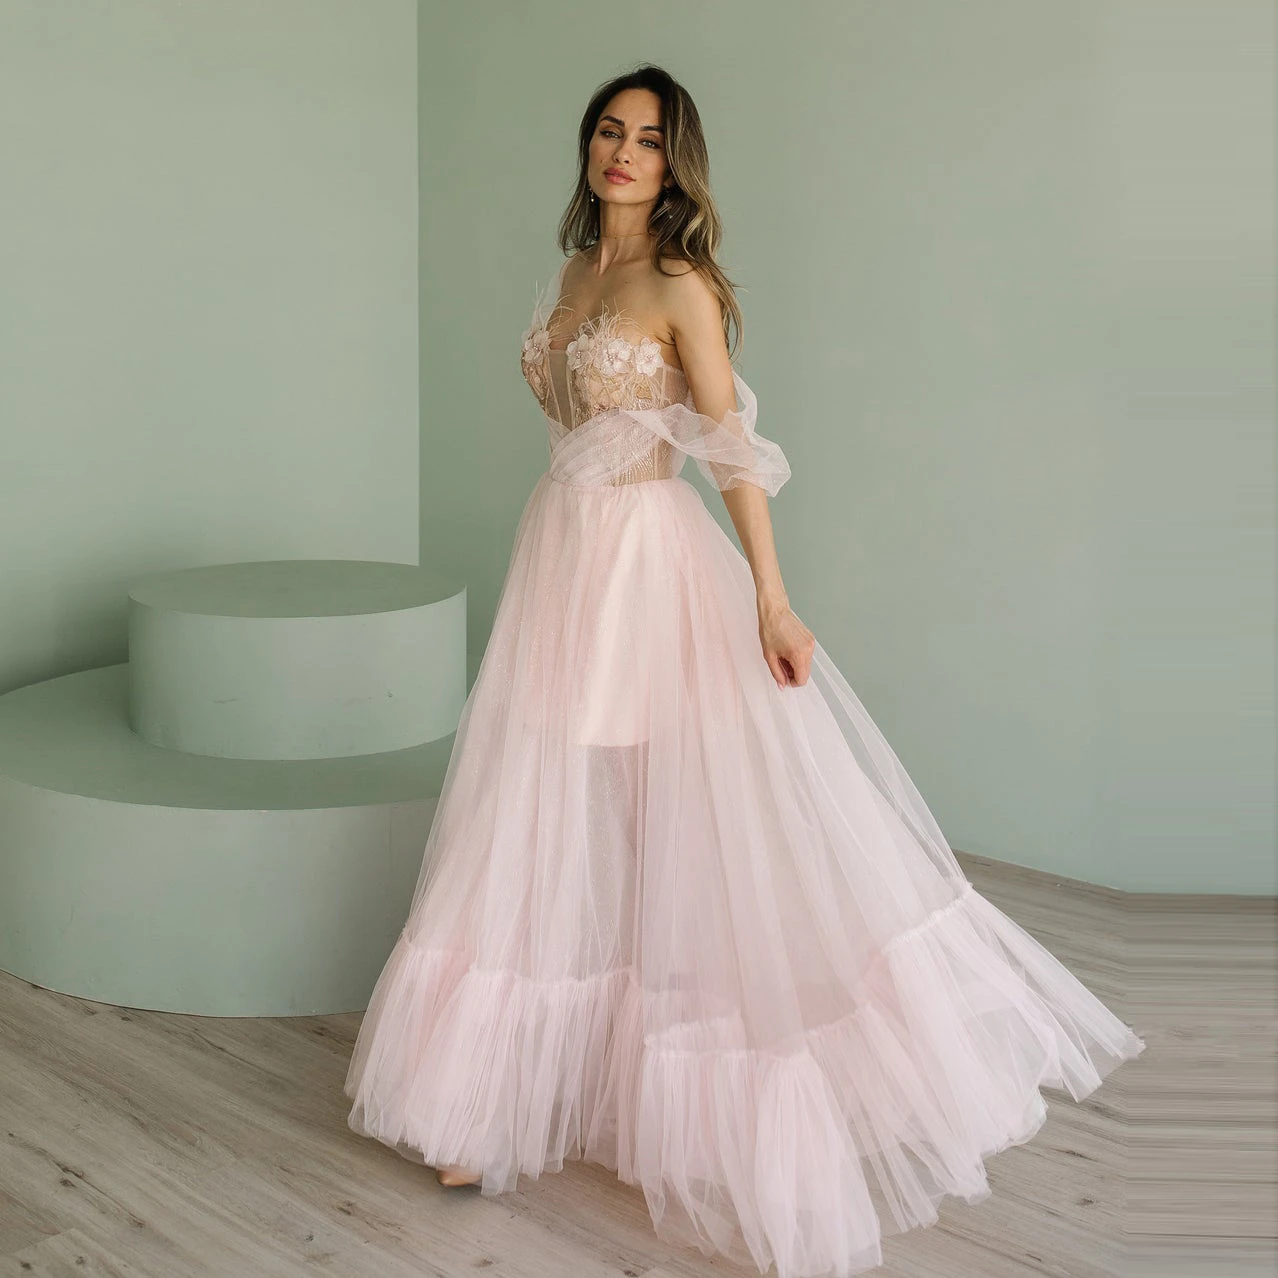 evening gowns with sleeves Blush Pink Lace Off-Shoulder Wedding Dress Custom Made Unique Beautiful Princess Bridal Gown for A Train Wedding Sparkly Dress long sleeve evening dresses